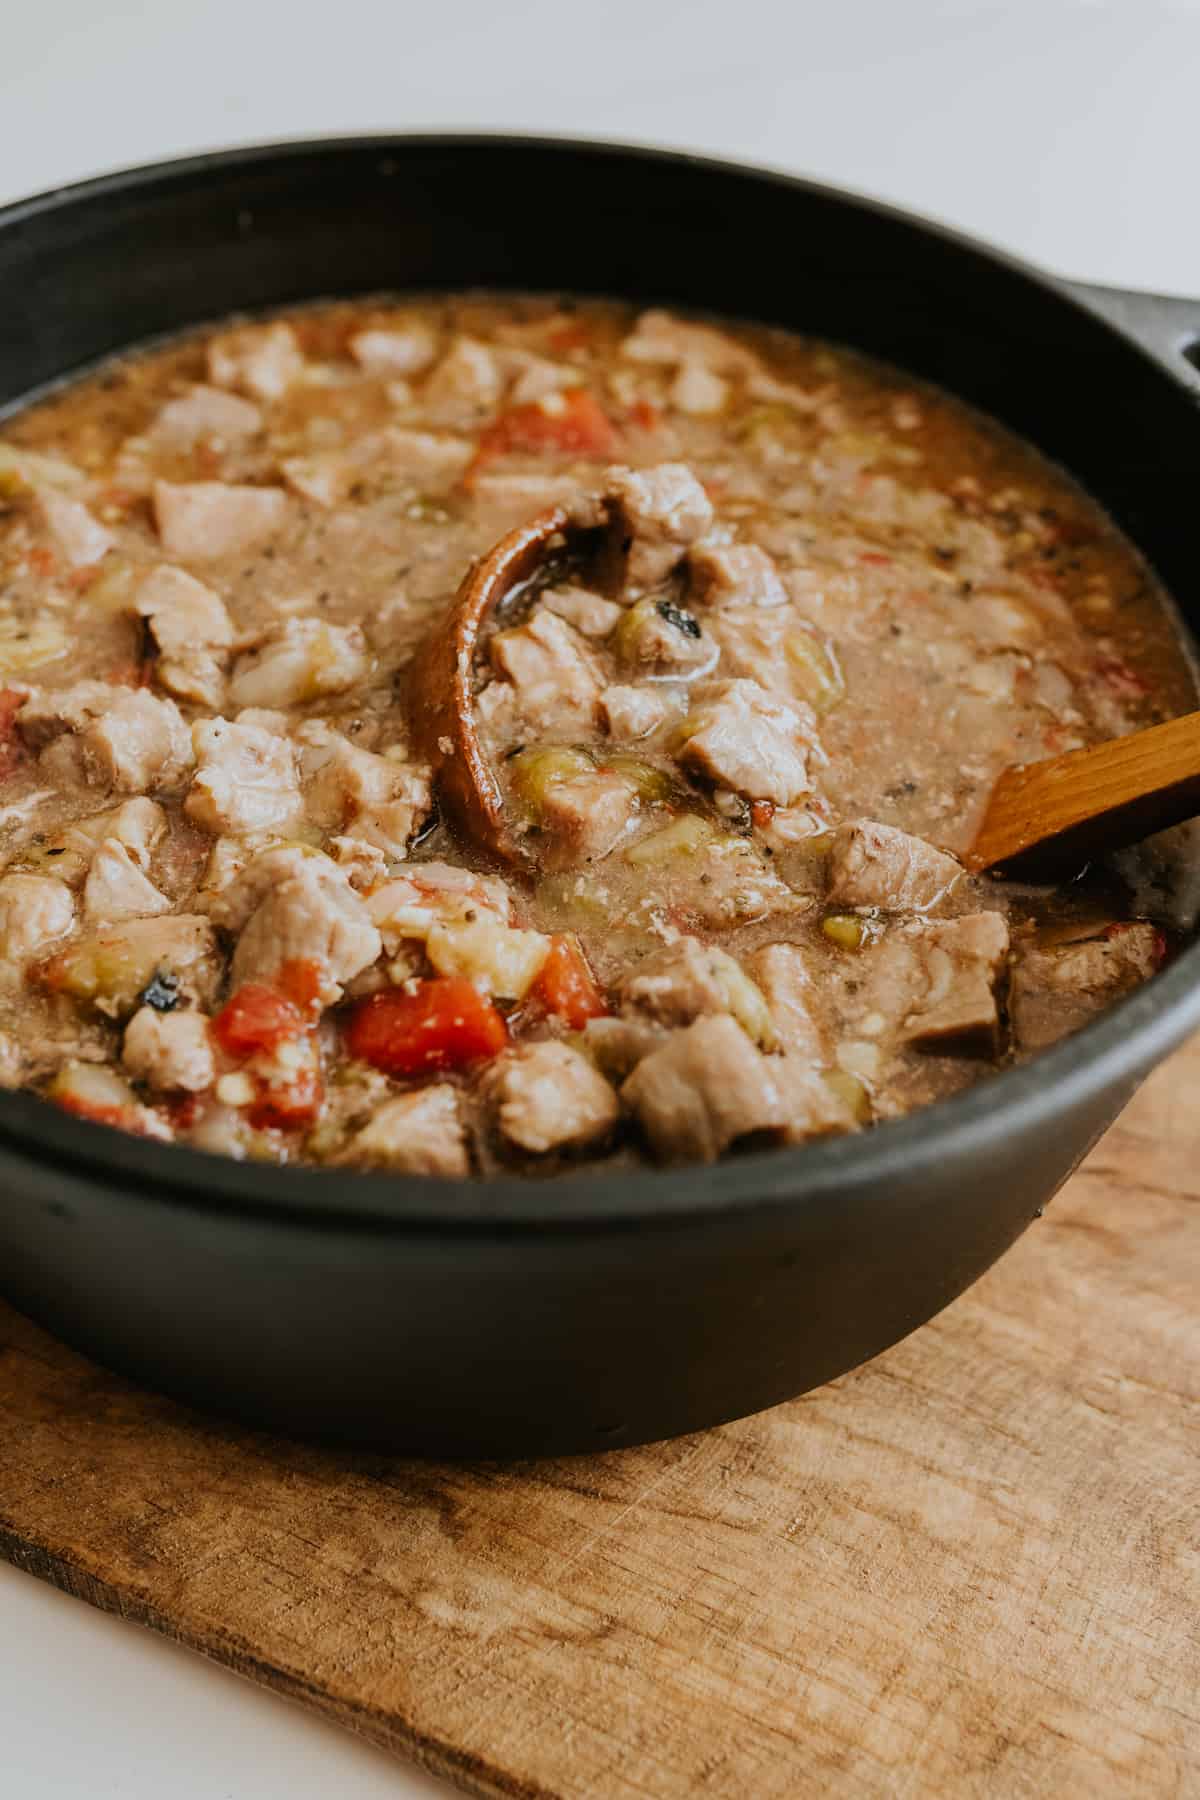 Pork Green Chile in a black cast iron pot packed with peeled, roasted chiles and succulent pork to create an easy and warming stew